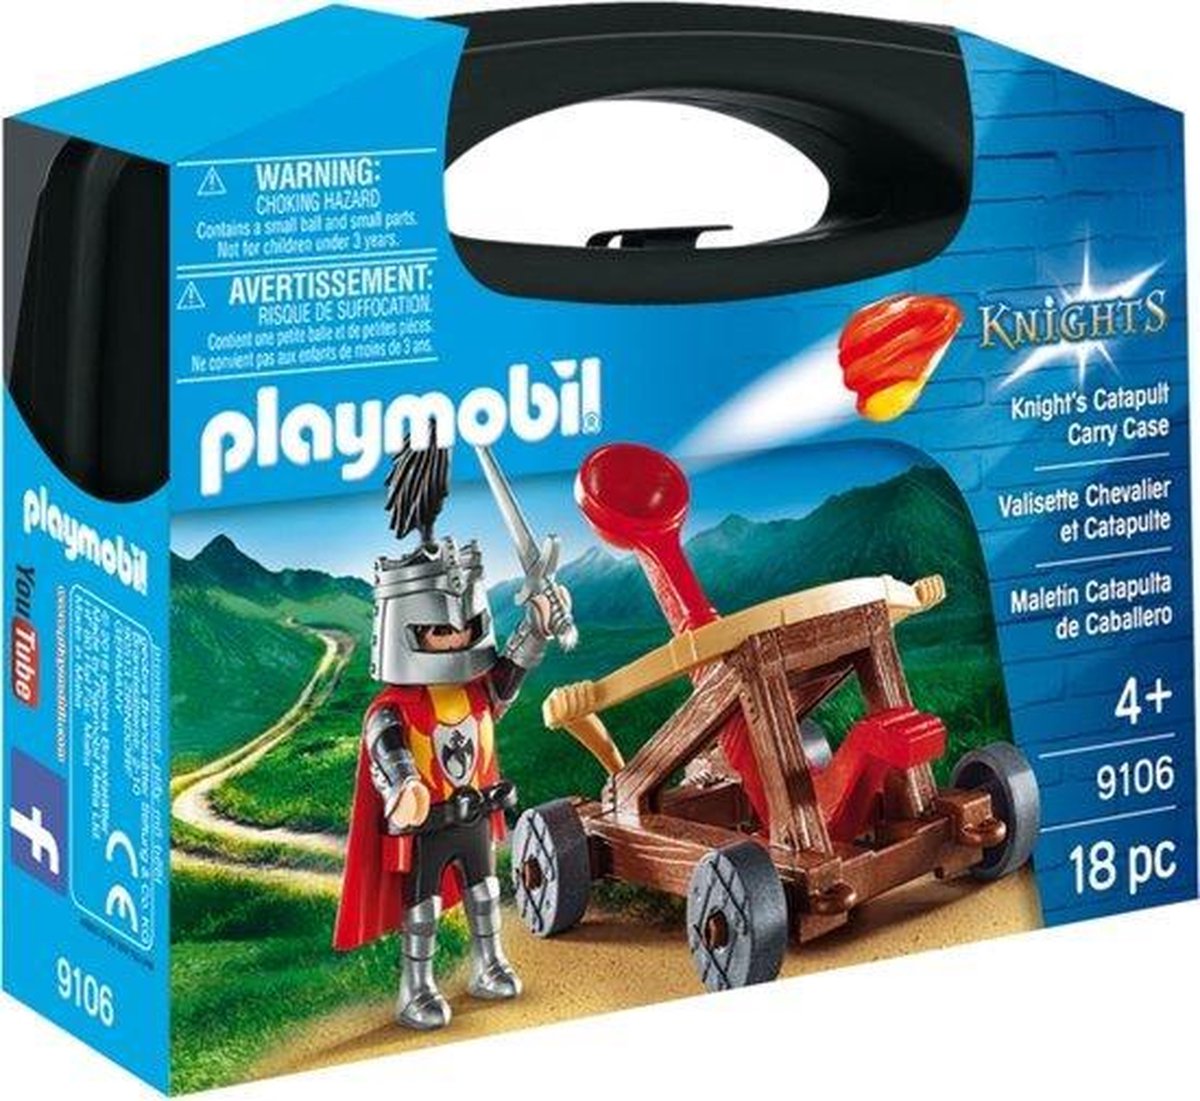 Playmobil Knights Katapult - Catapult Carry Case - 9106